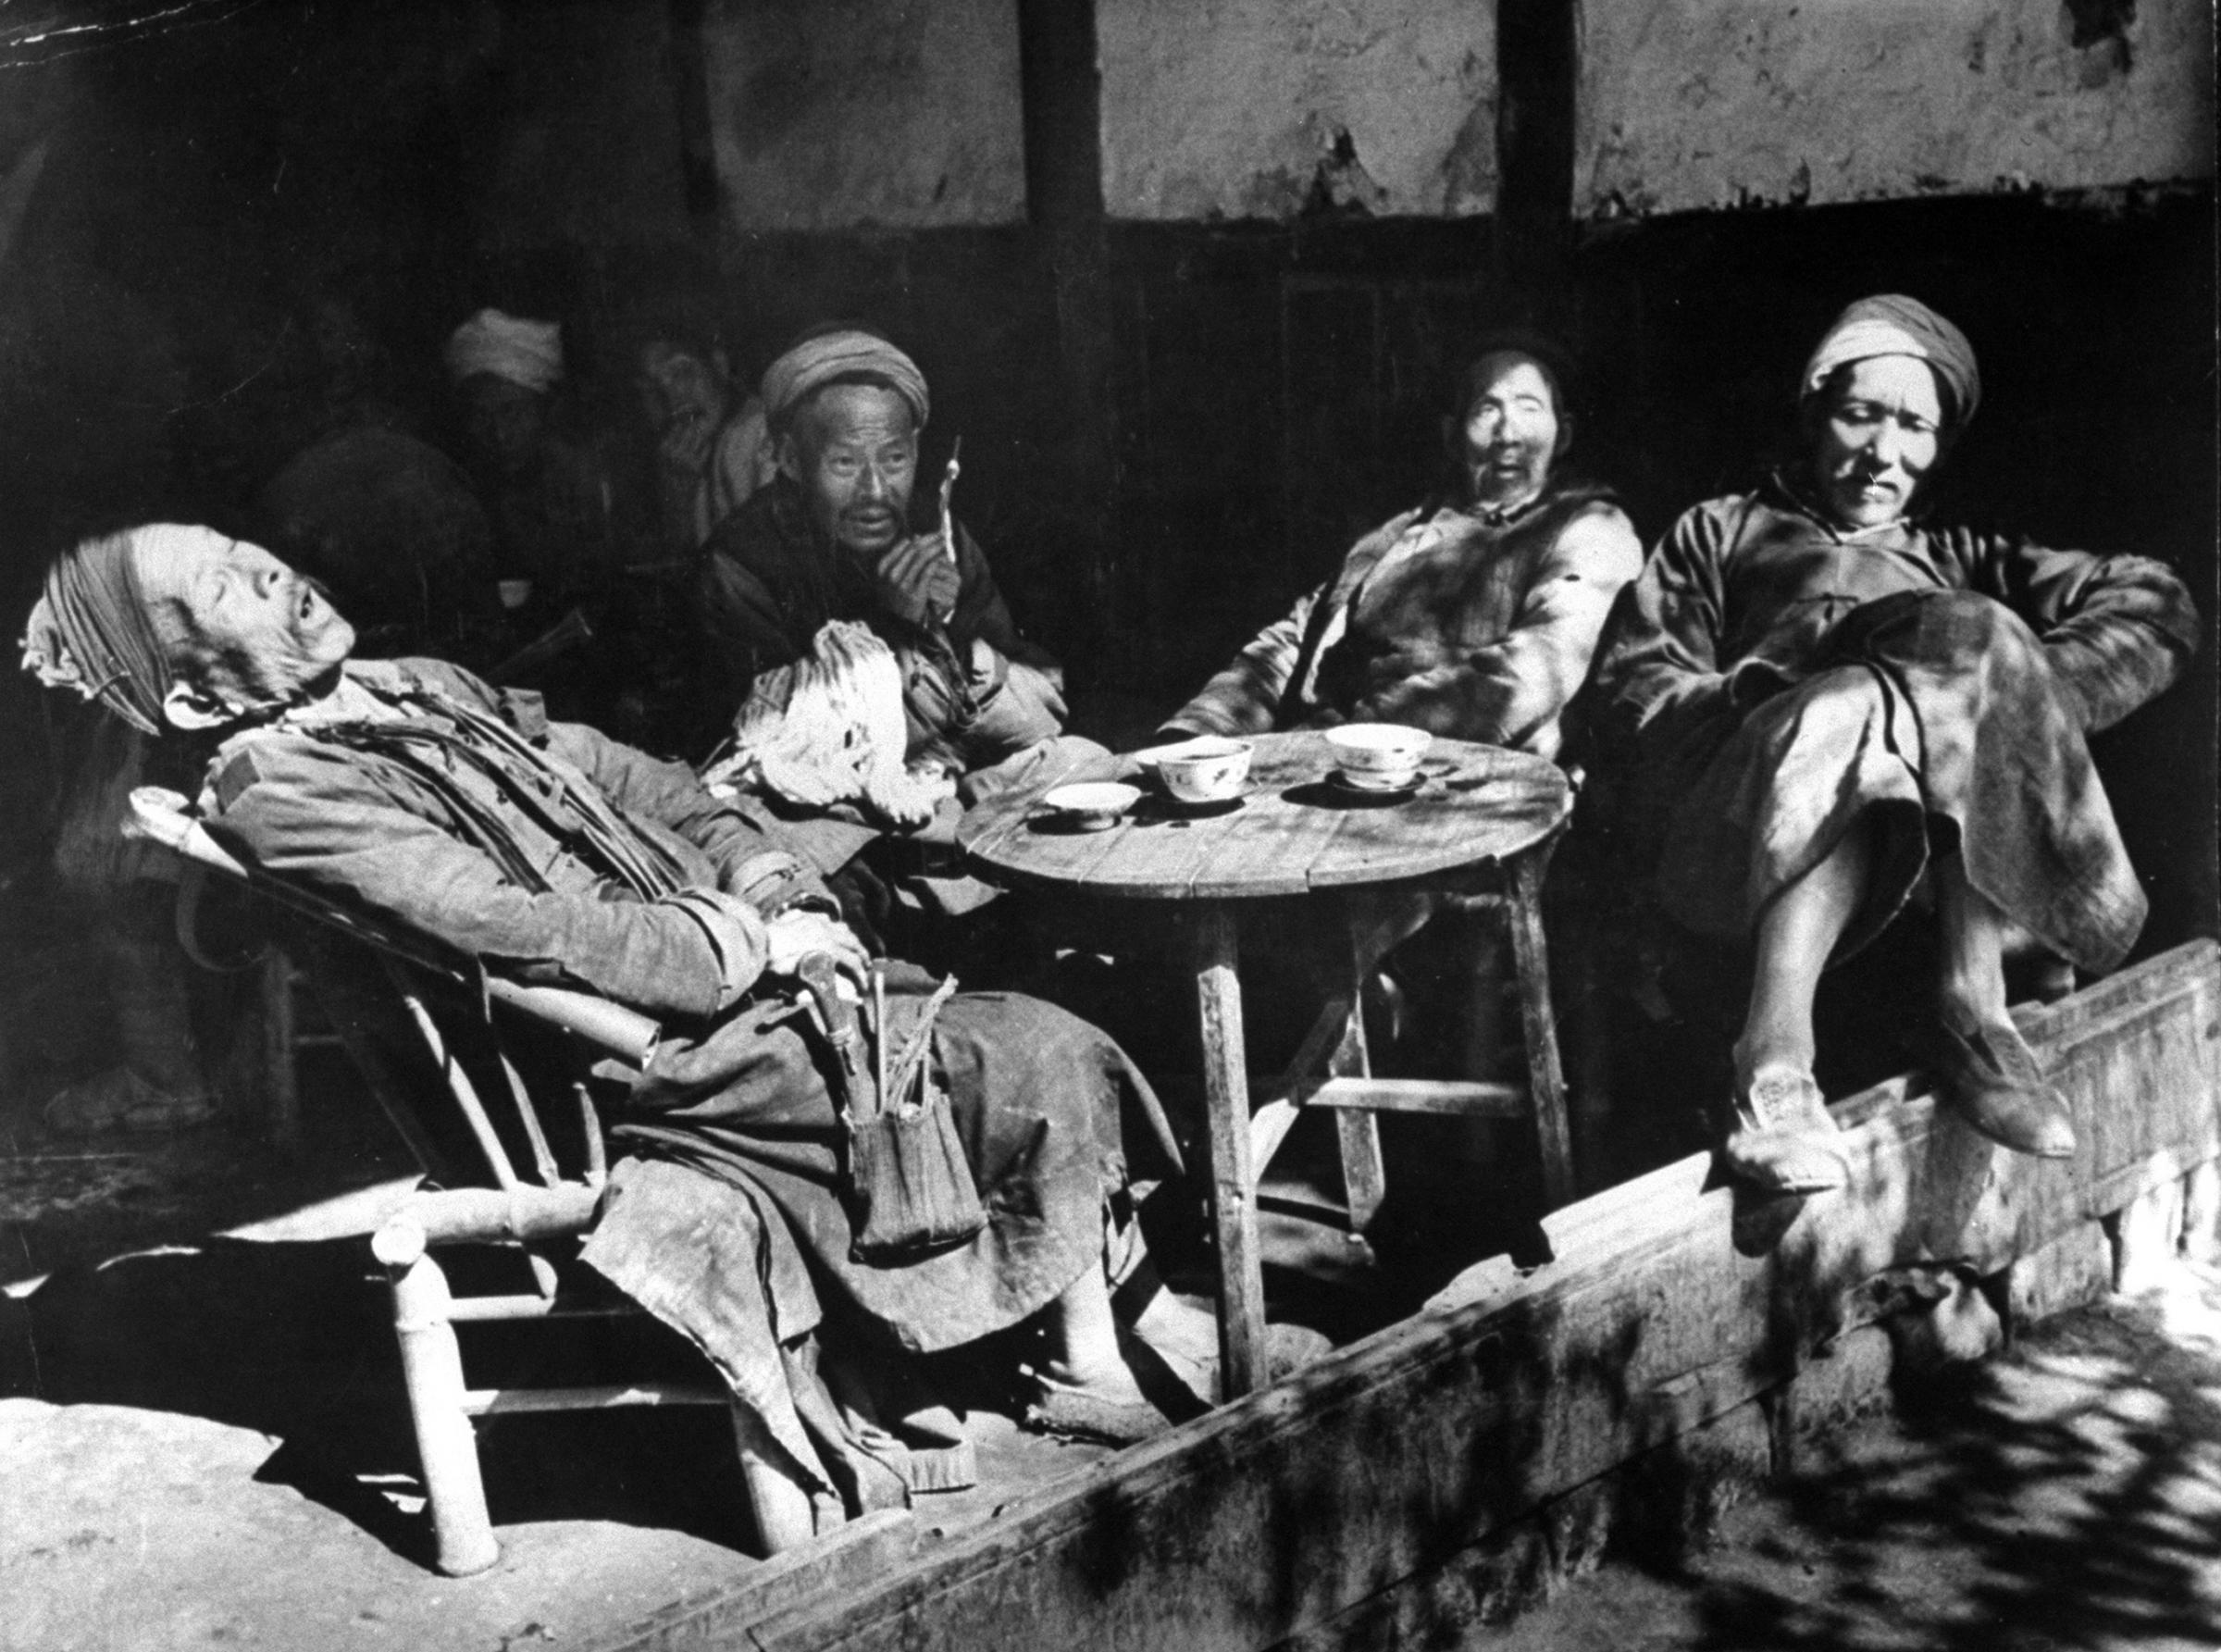 Old farmers relaxing at a Szechuan teahouse after market day in a village near Chengtu. This image appeared in the May 1, 1944 feature: "LIFE" Looks at China—Through the blockade one of its correspondents brings this firsthand report.